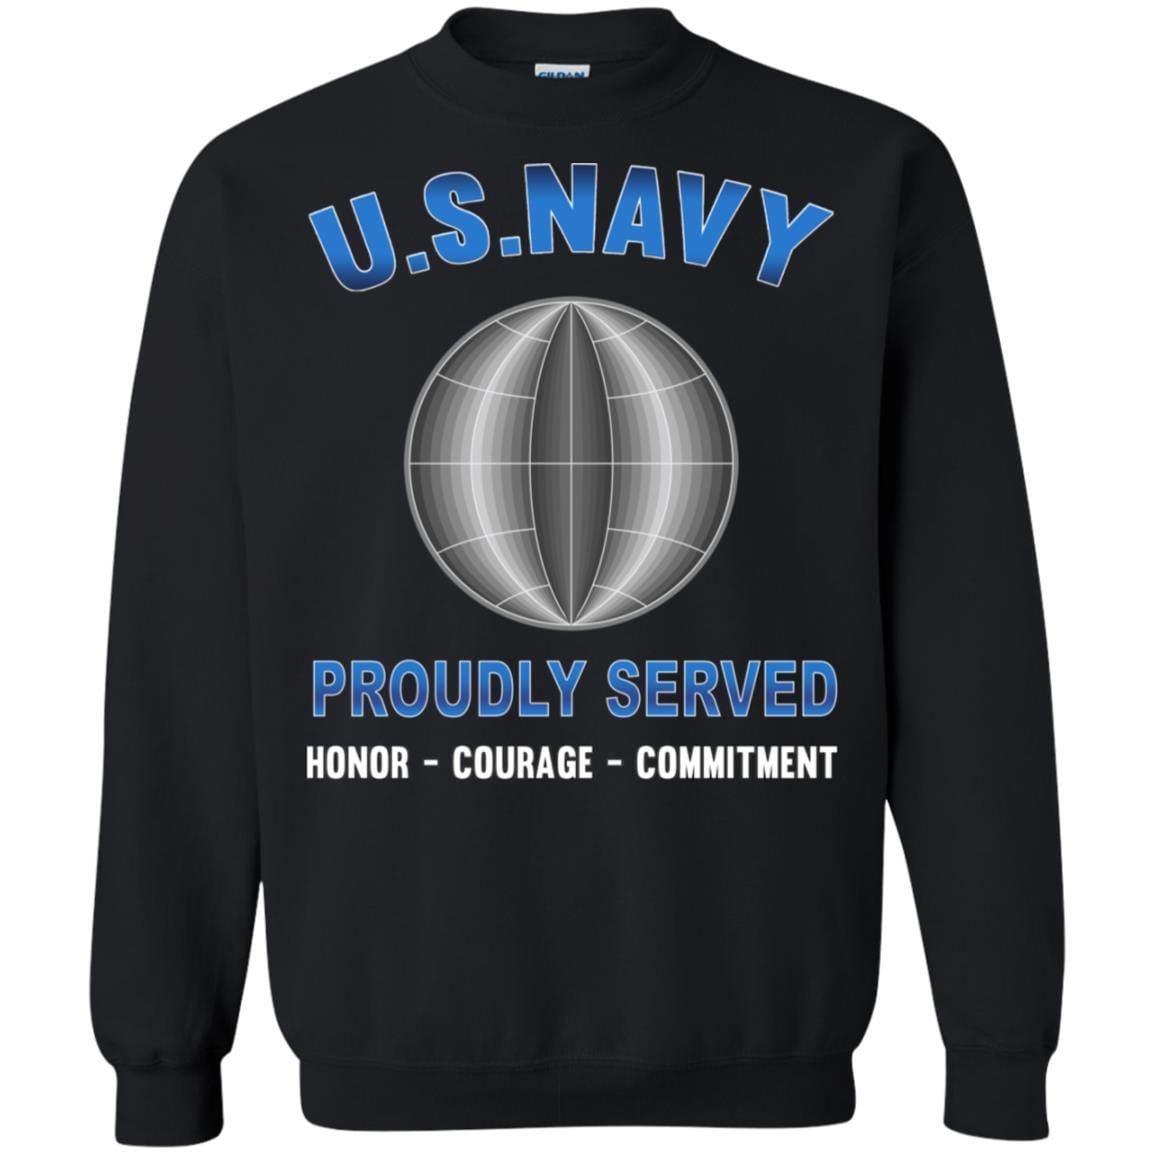 U.S Navy Electrician's mate Navy EM - Proudly Served T-Shirt For Men On Front-TShirt-Navy-Veterans Nation